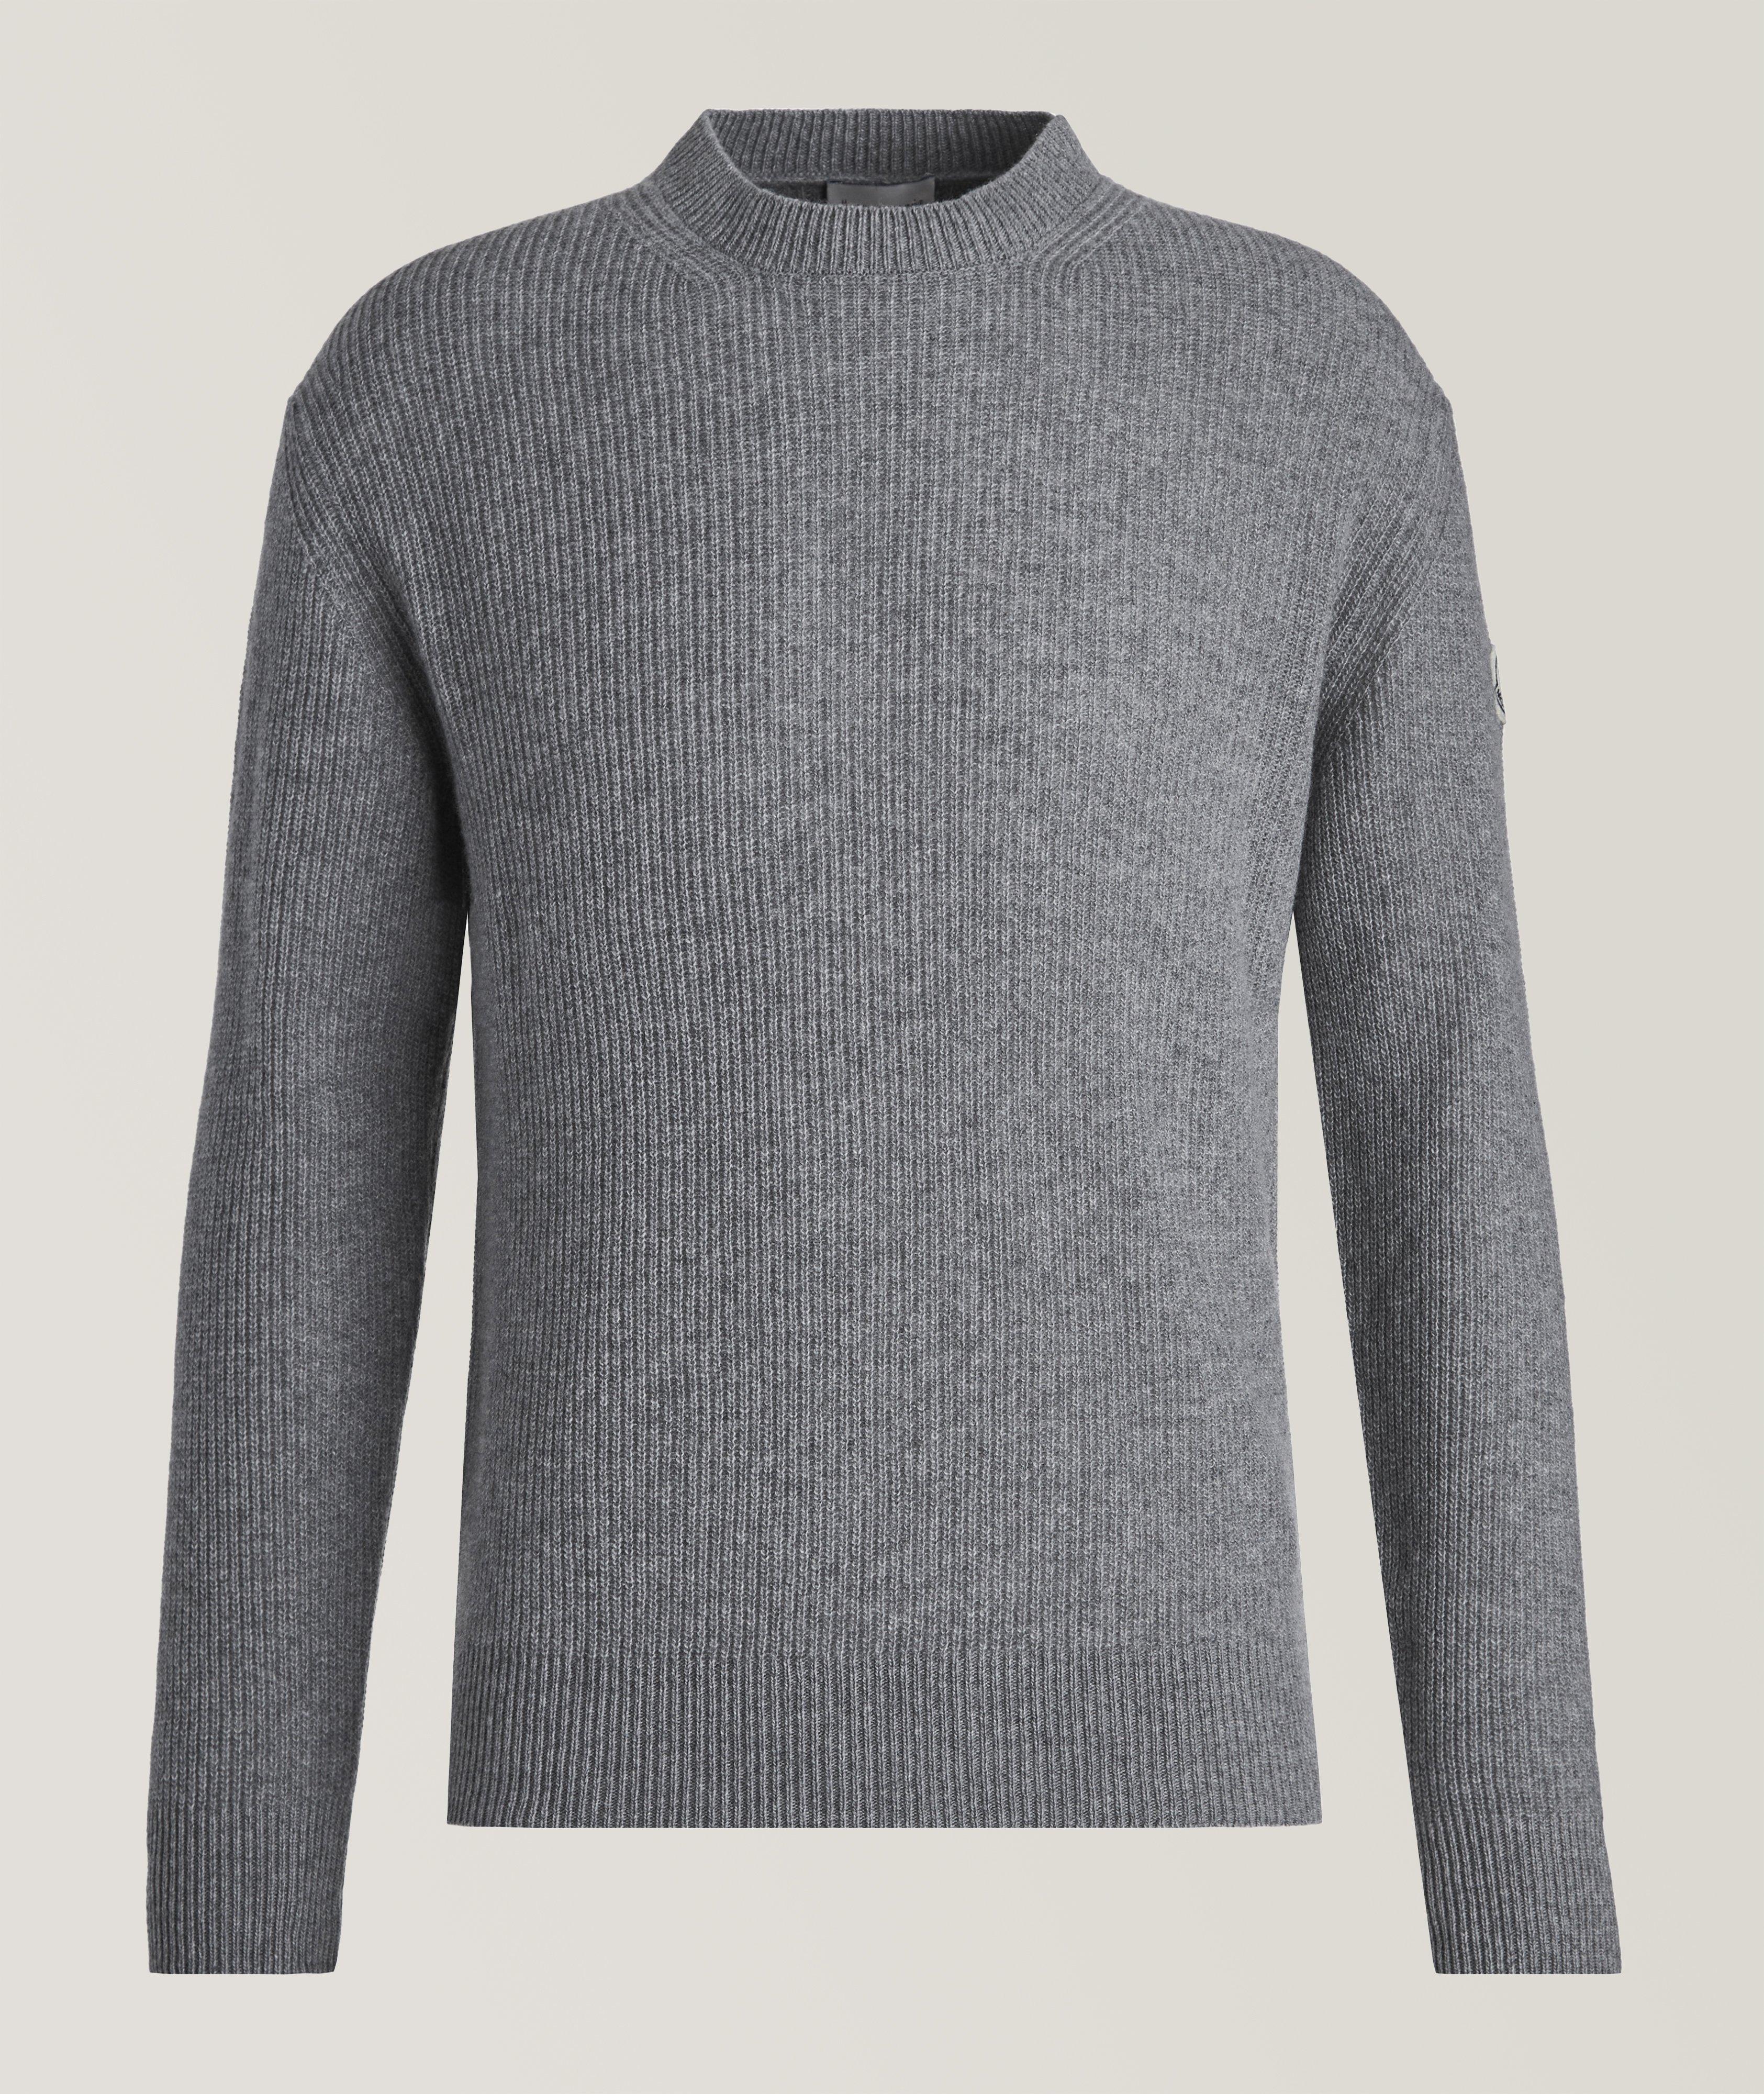 Wool-Cashmere Ribbed Sweater image 0